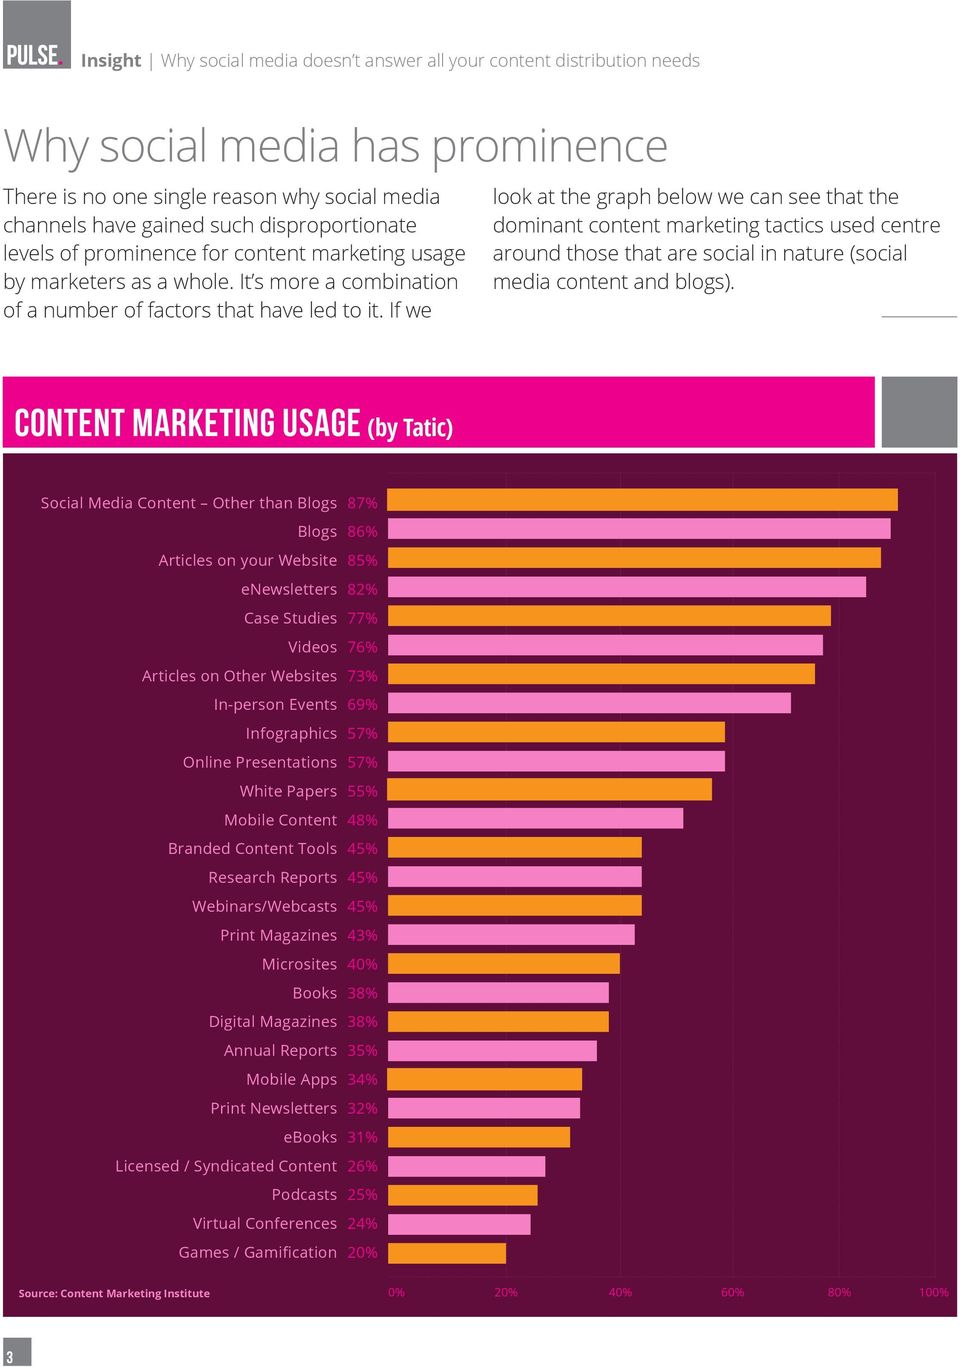 If we look at the graph below we can see that the dominant content marketing tactics used centre around those that are social in nature (social media content and blogs).